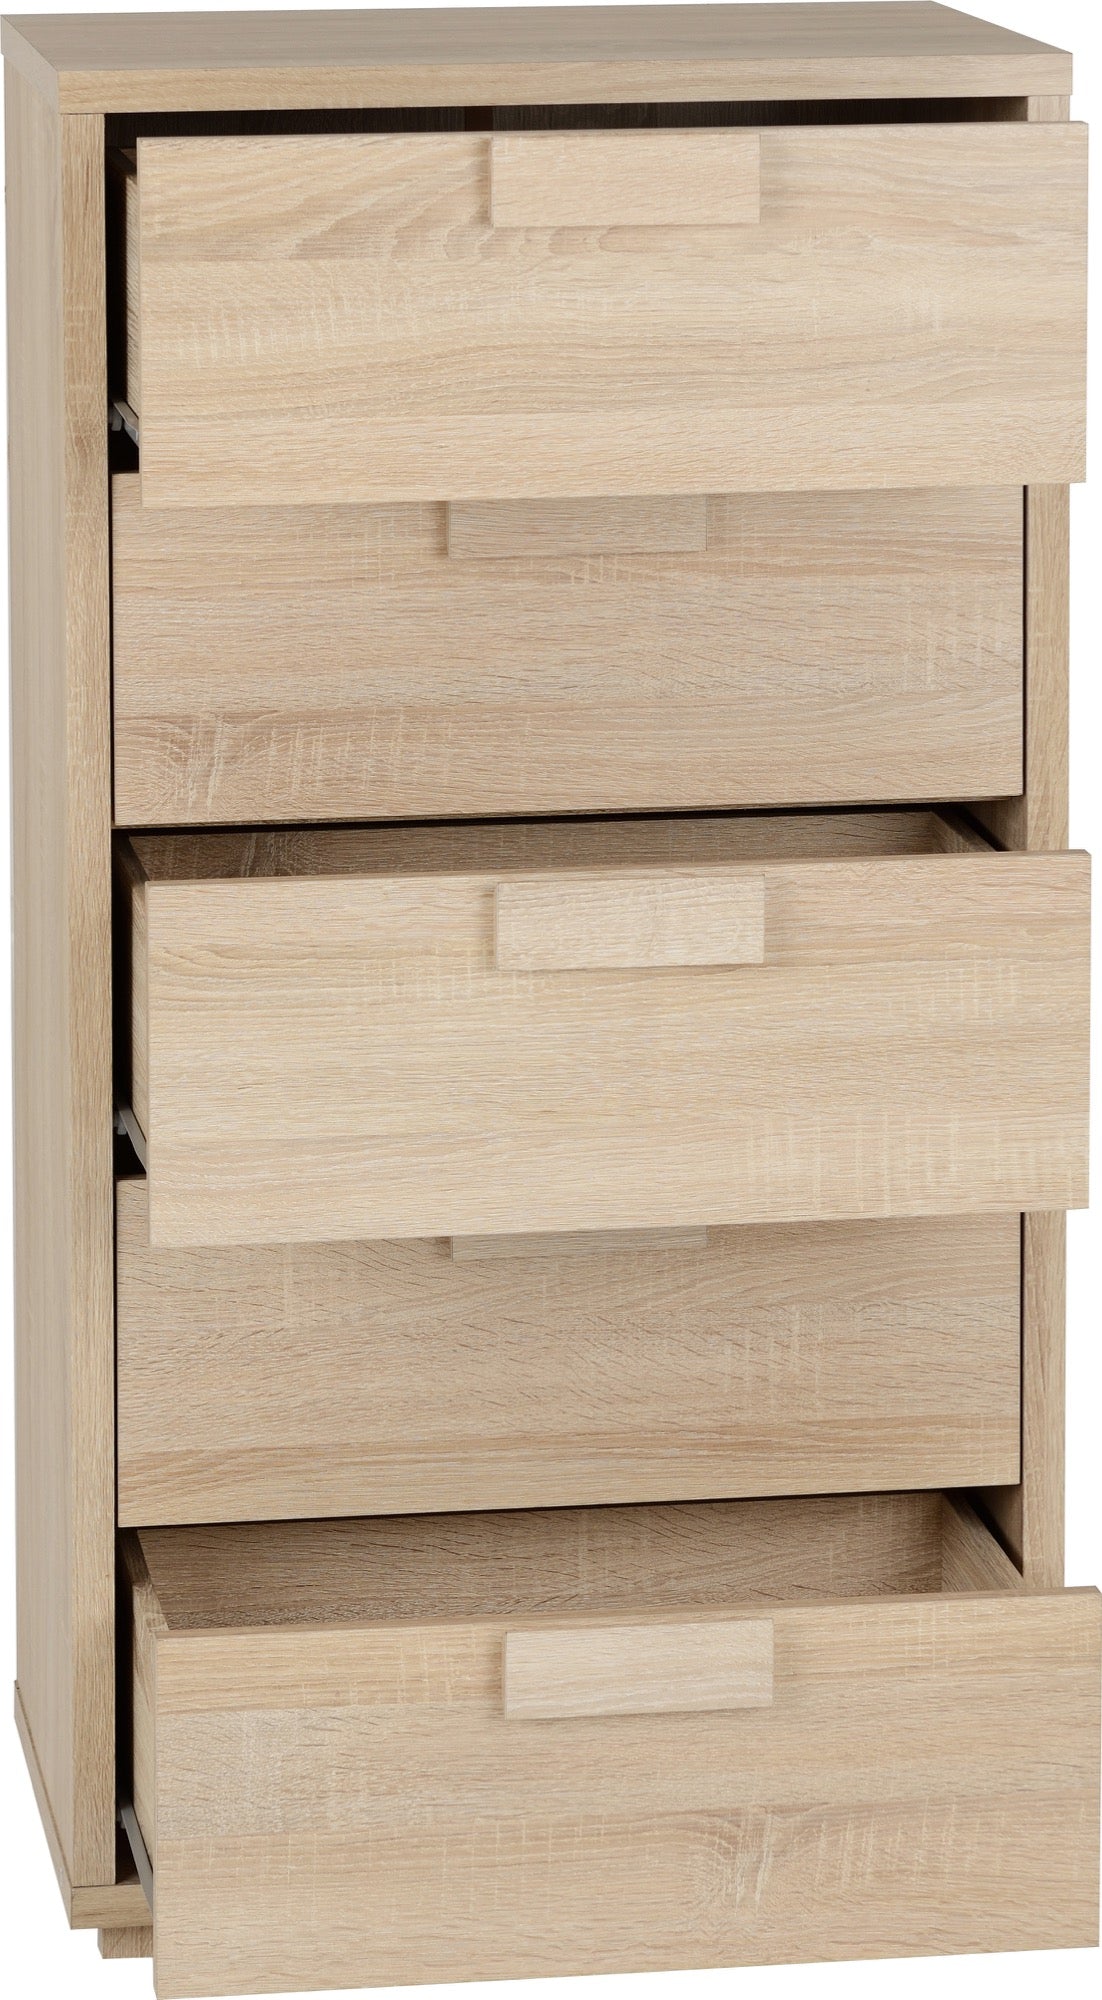 Cambourne 5 Drawer Chest - Sonoma Oak Effect - The Right Buy Store